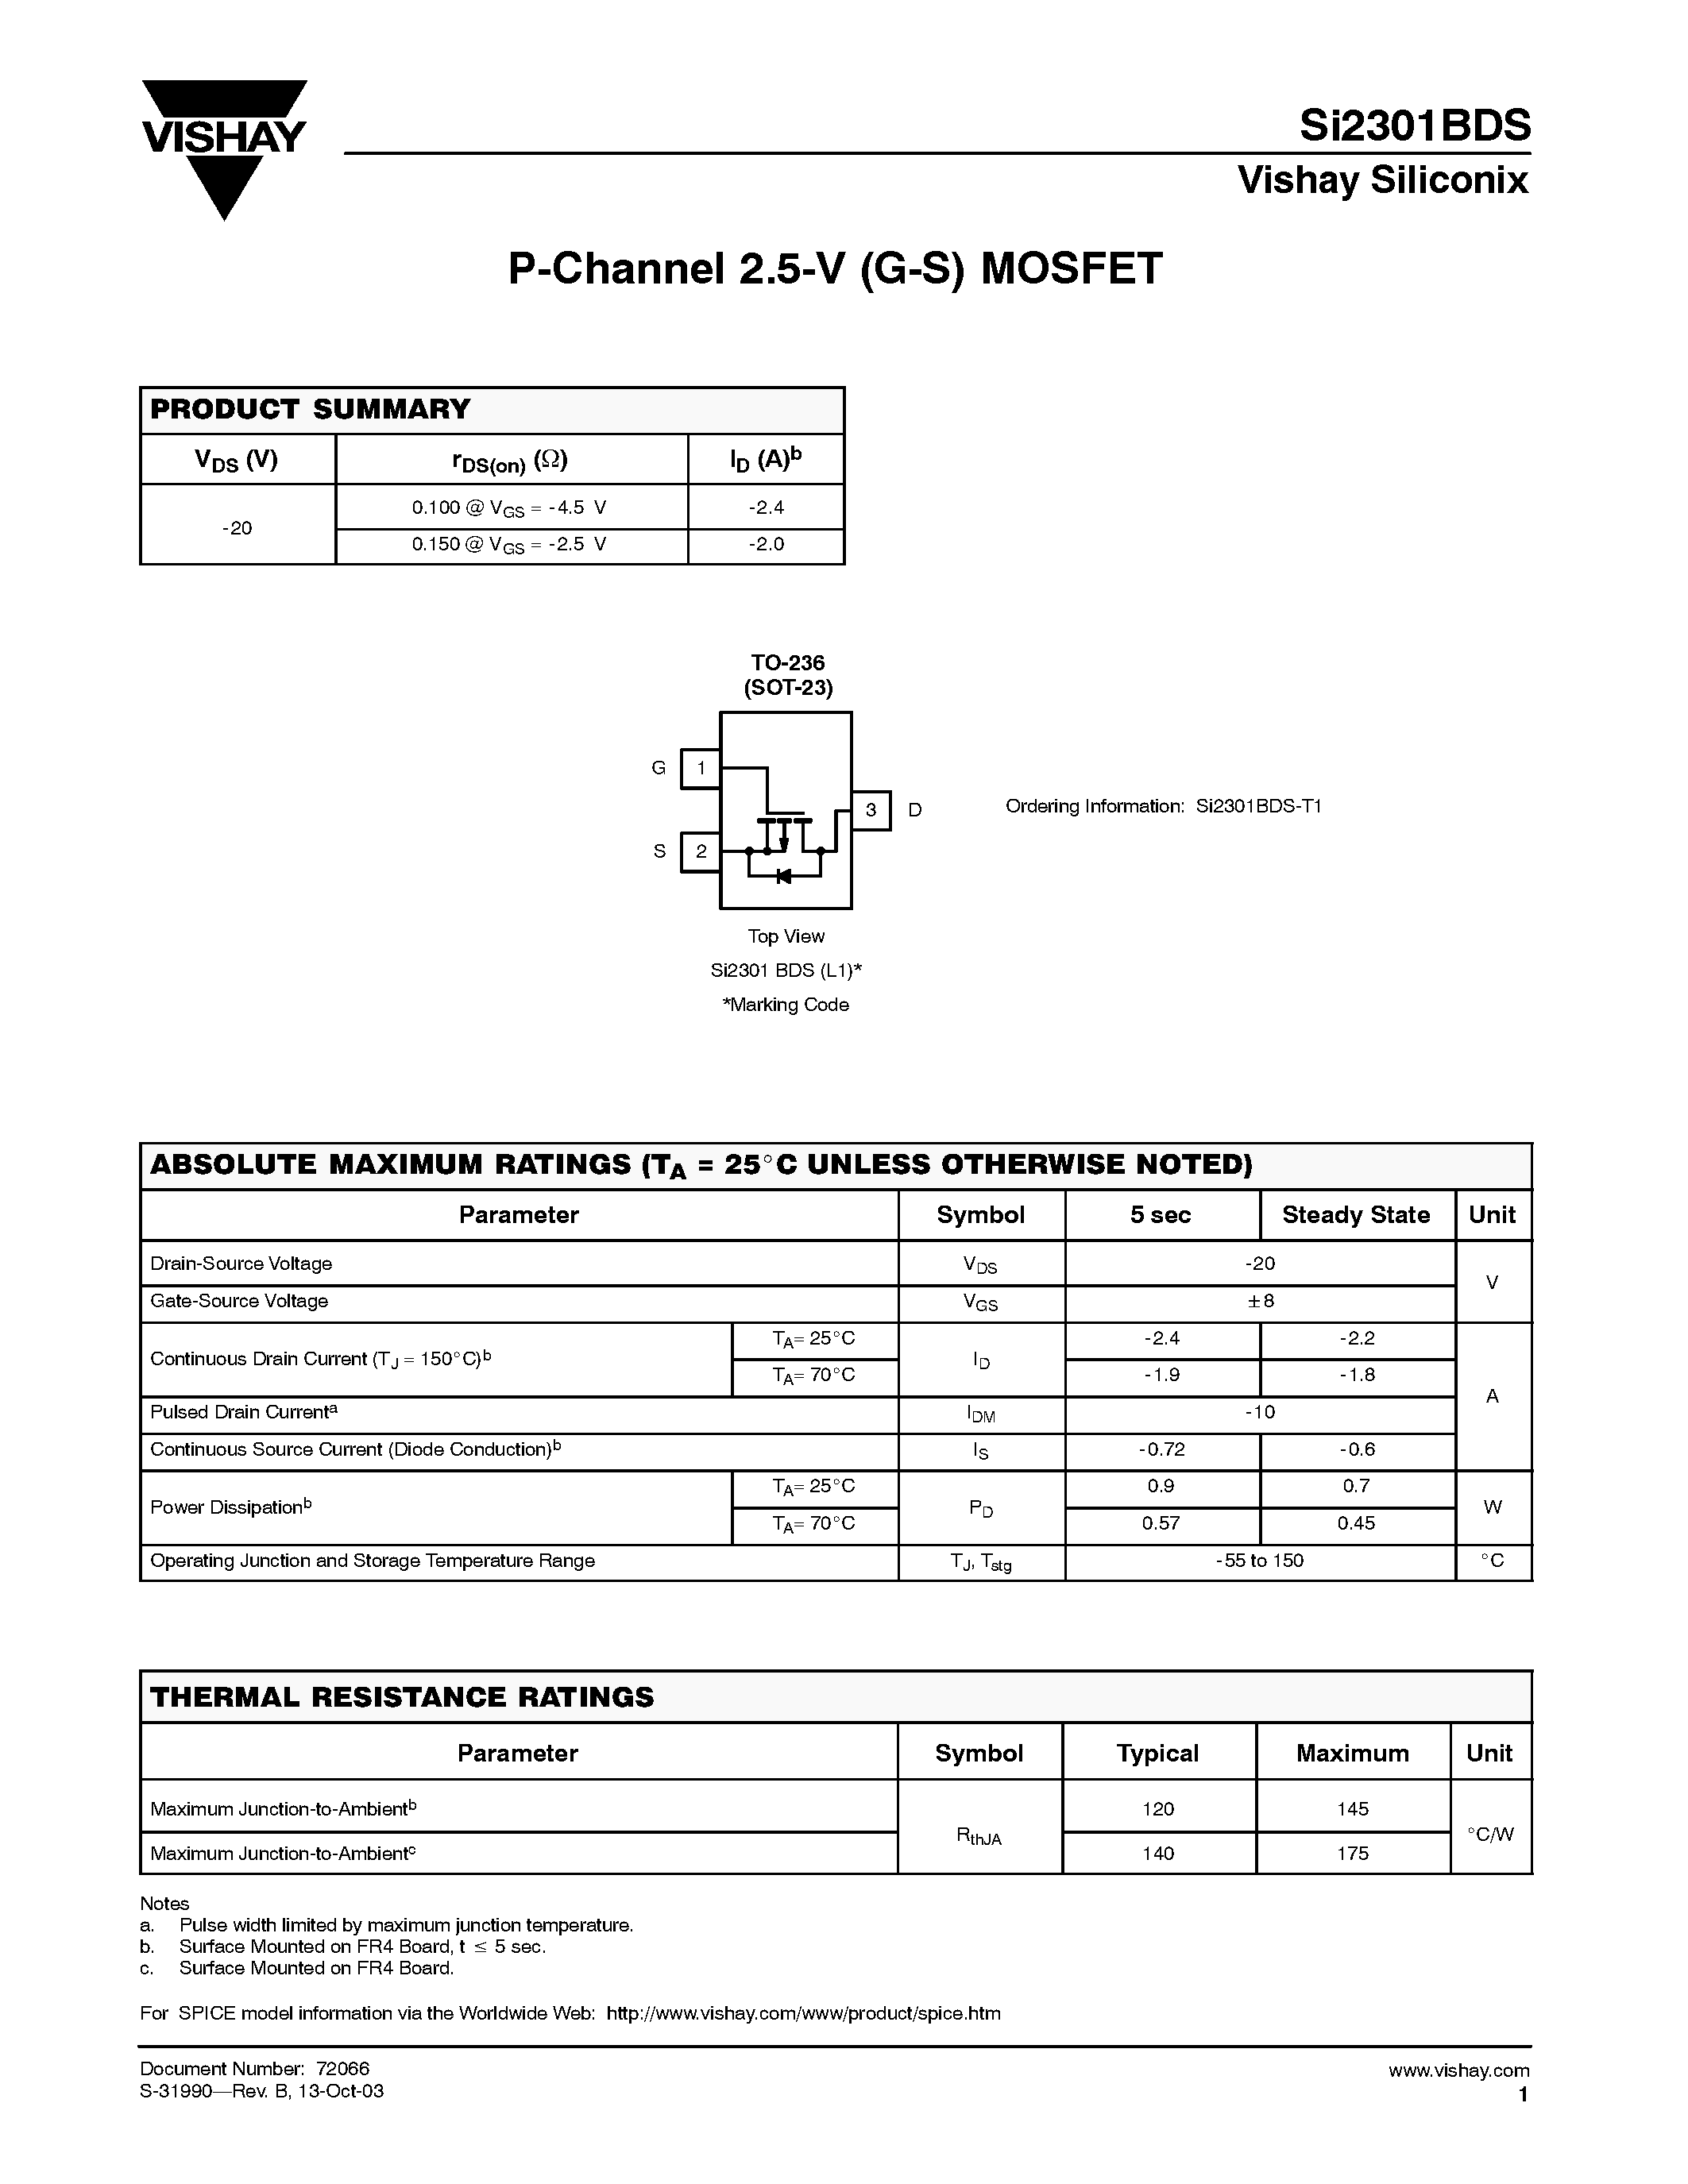 Datasheet SI2301BDS - P-Channel 2.5-V (G-S) MOSFET page 1